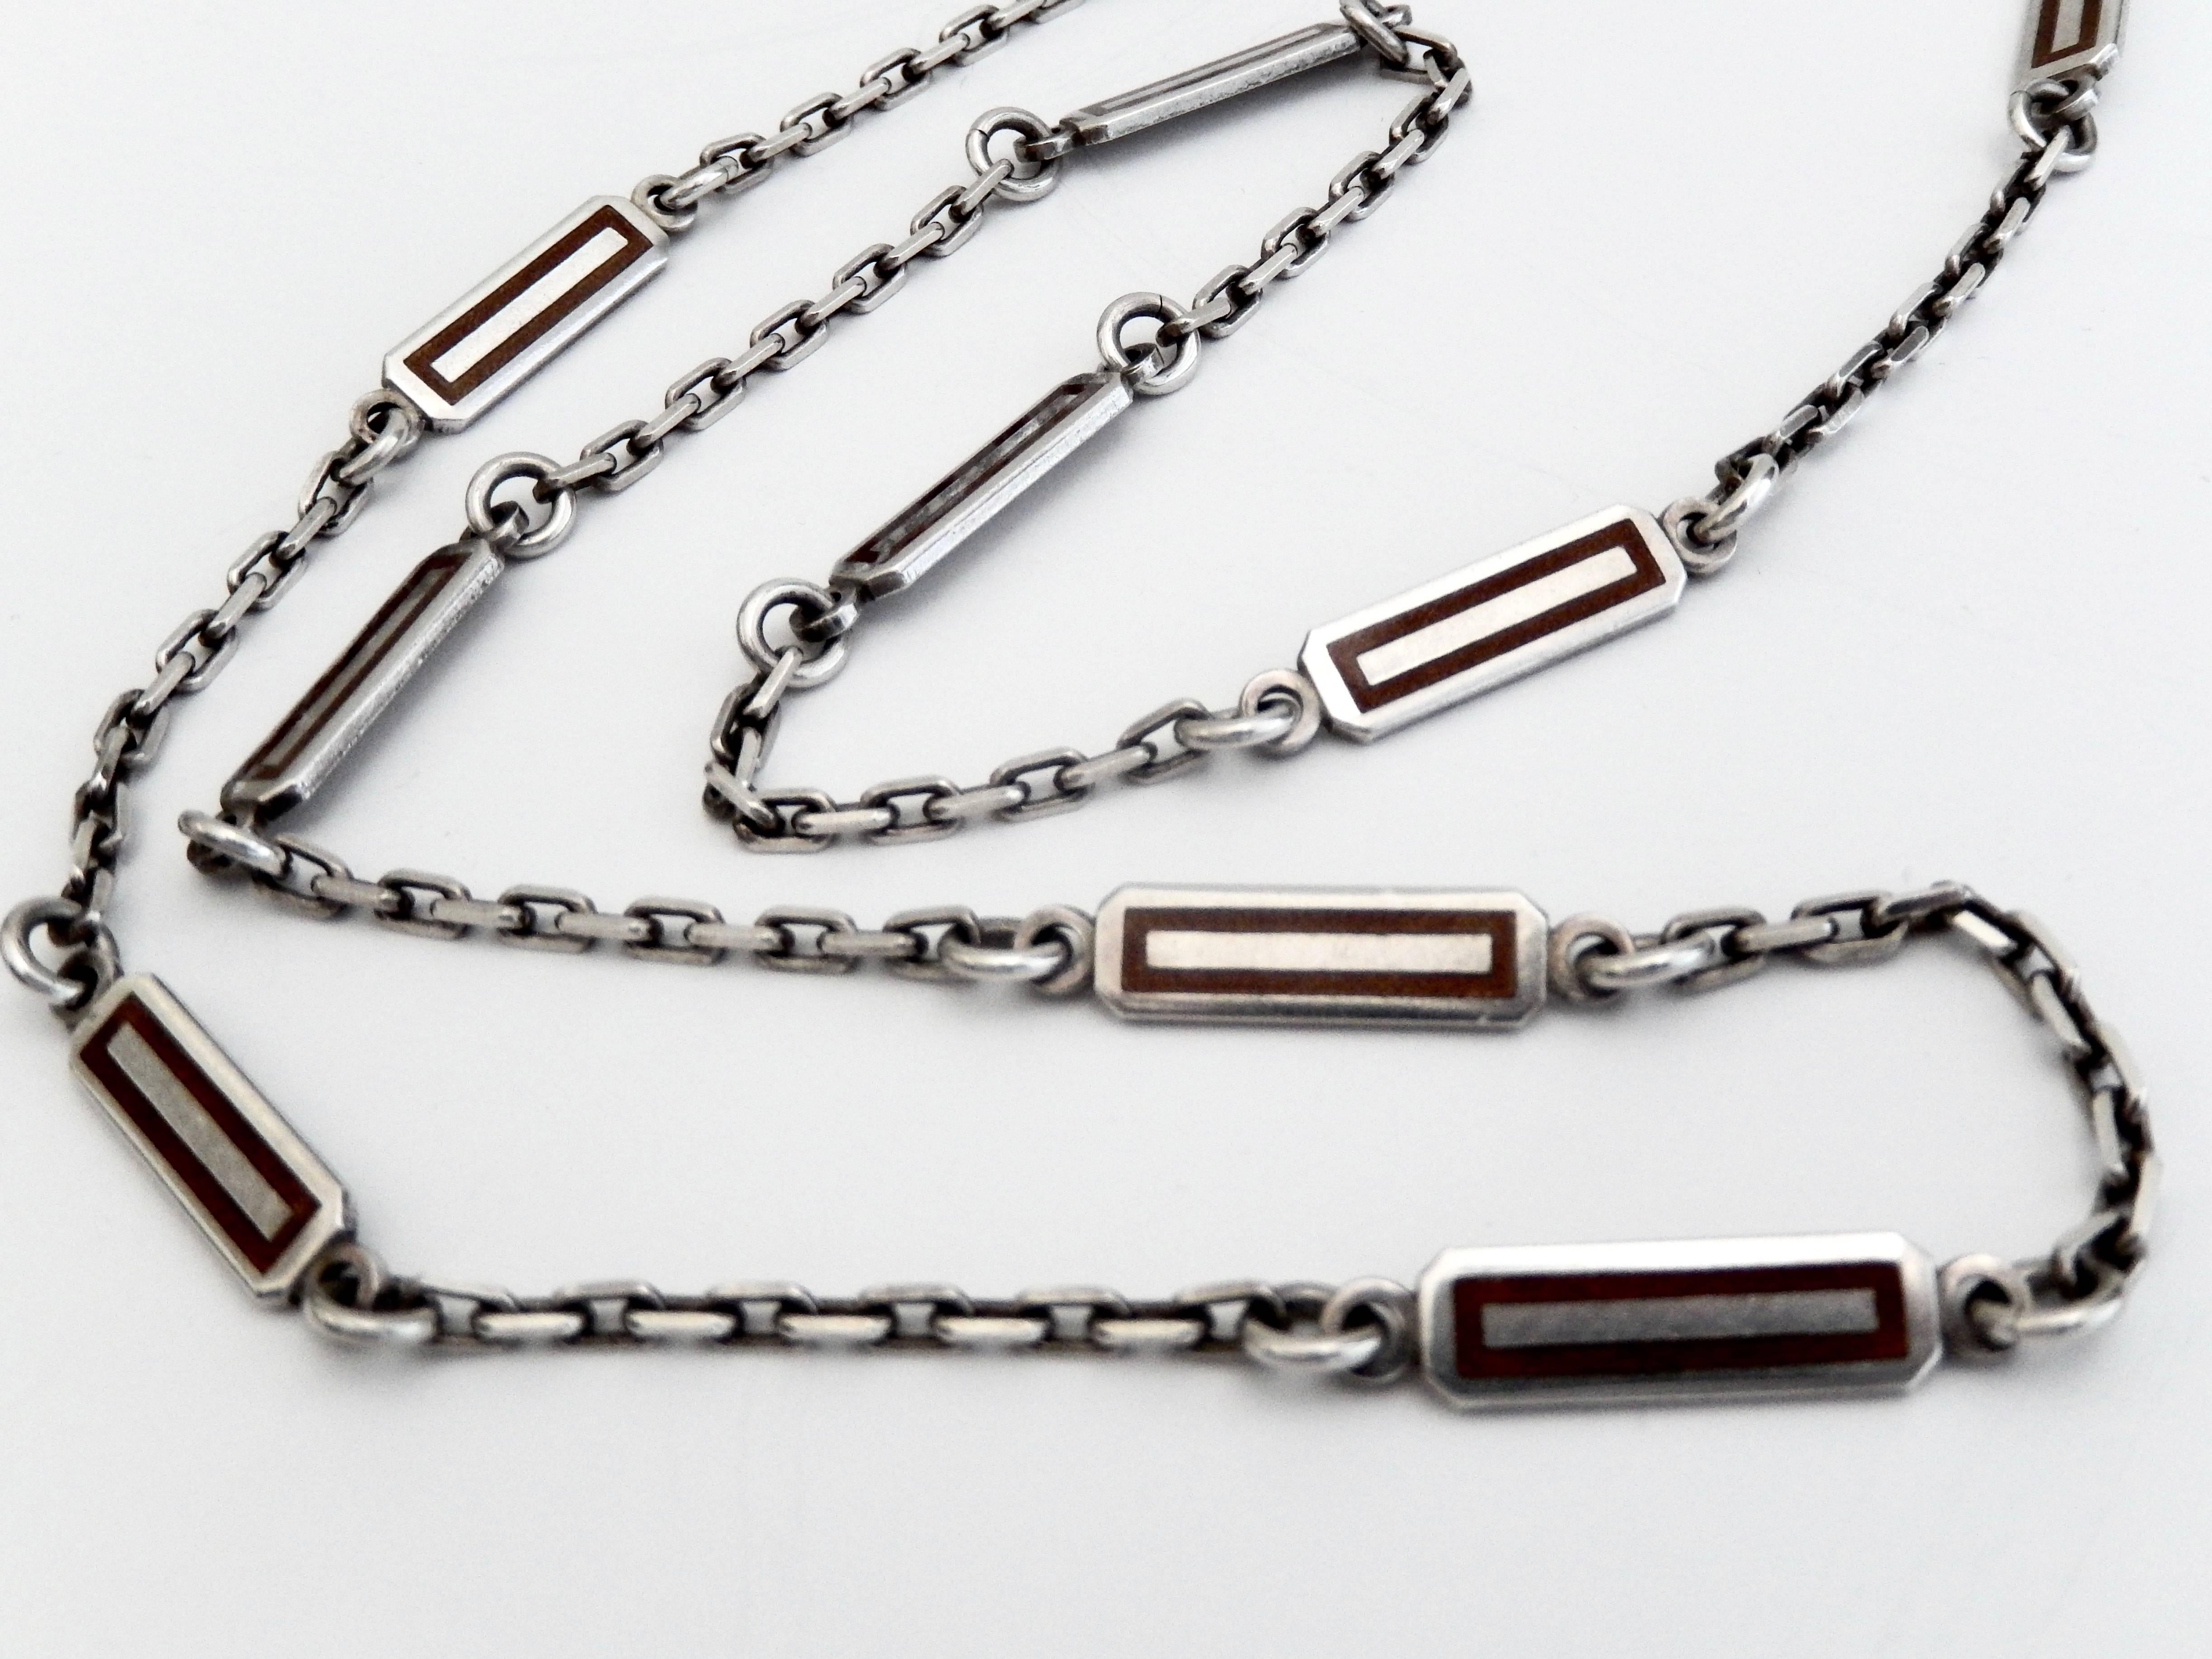 A geometric chain necklace by Gucci.  The rectangular links are highlighted with a chocolate brown enamel. Very cool vintage Seventies Gucci chain.
Marked:  GUCCI  Italy 925 BREV.  No clasp.